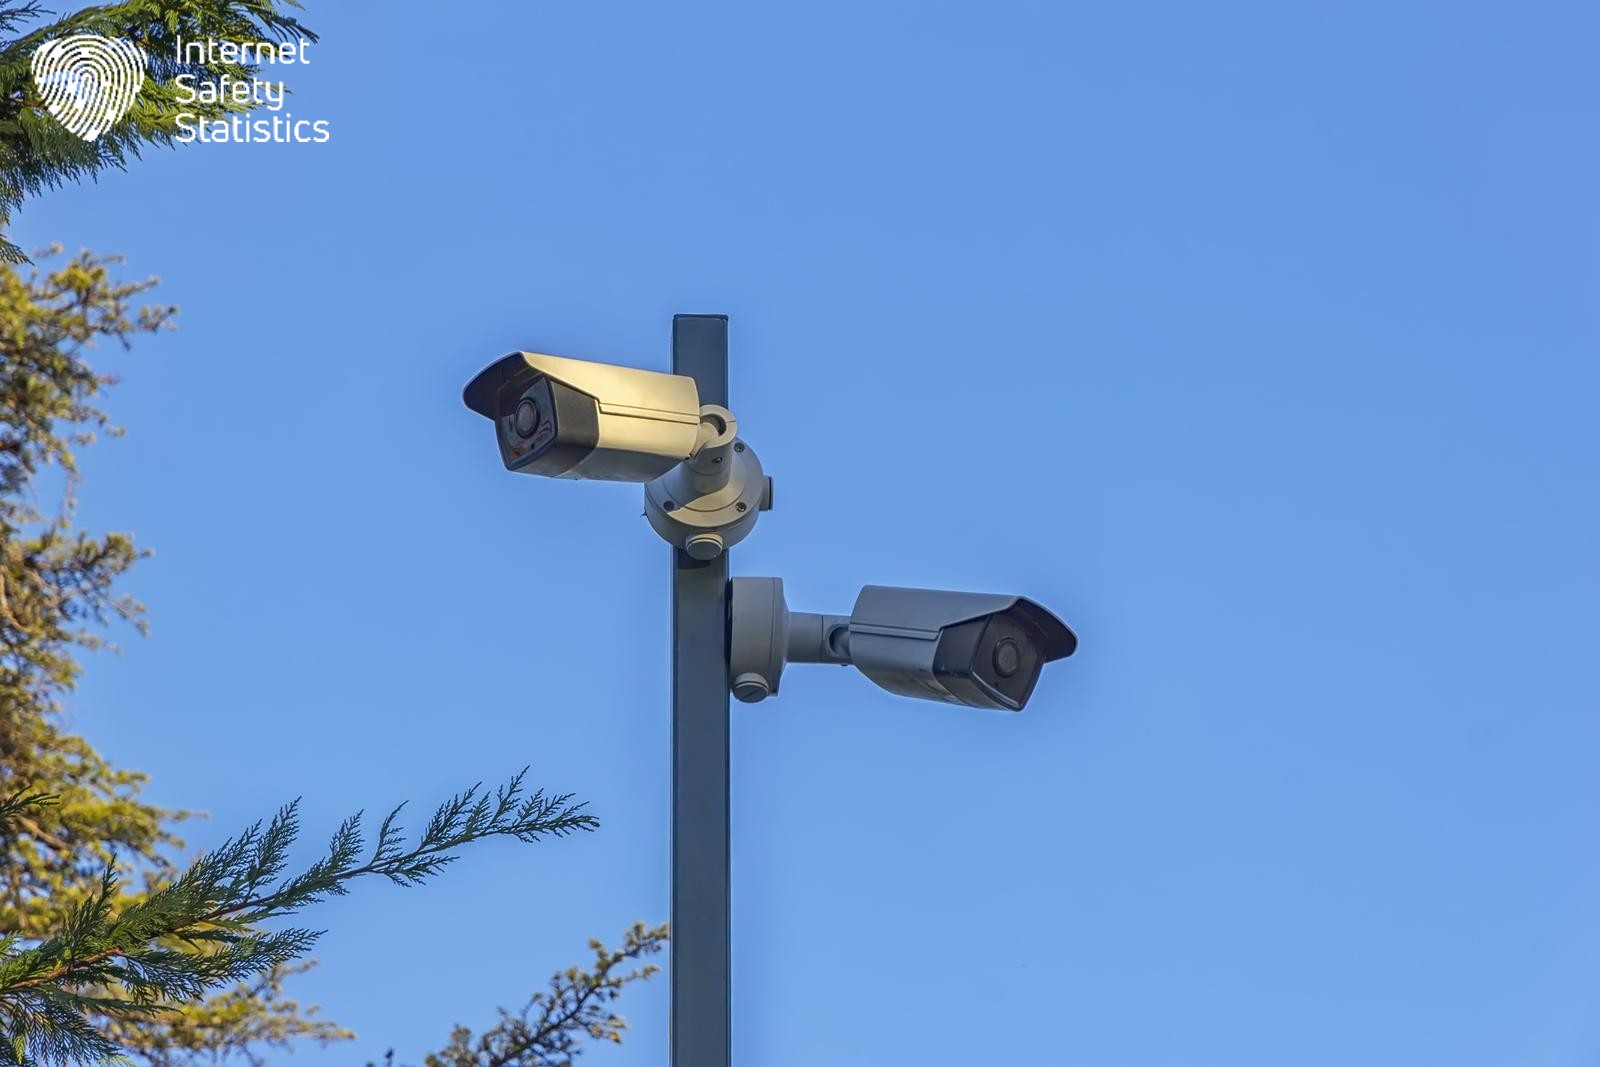 Security Camera Privacy Laws - In public and domestic domains, CCTVs effectively predict, prevent, and investigate crimes and vandalism.